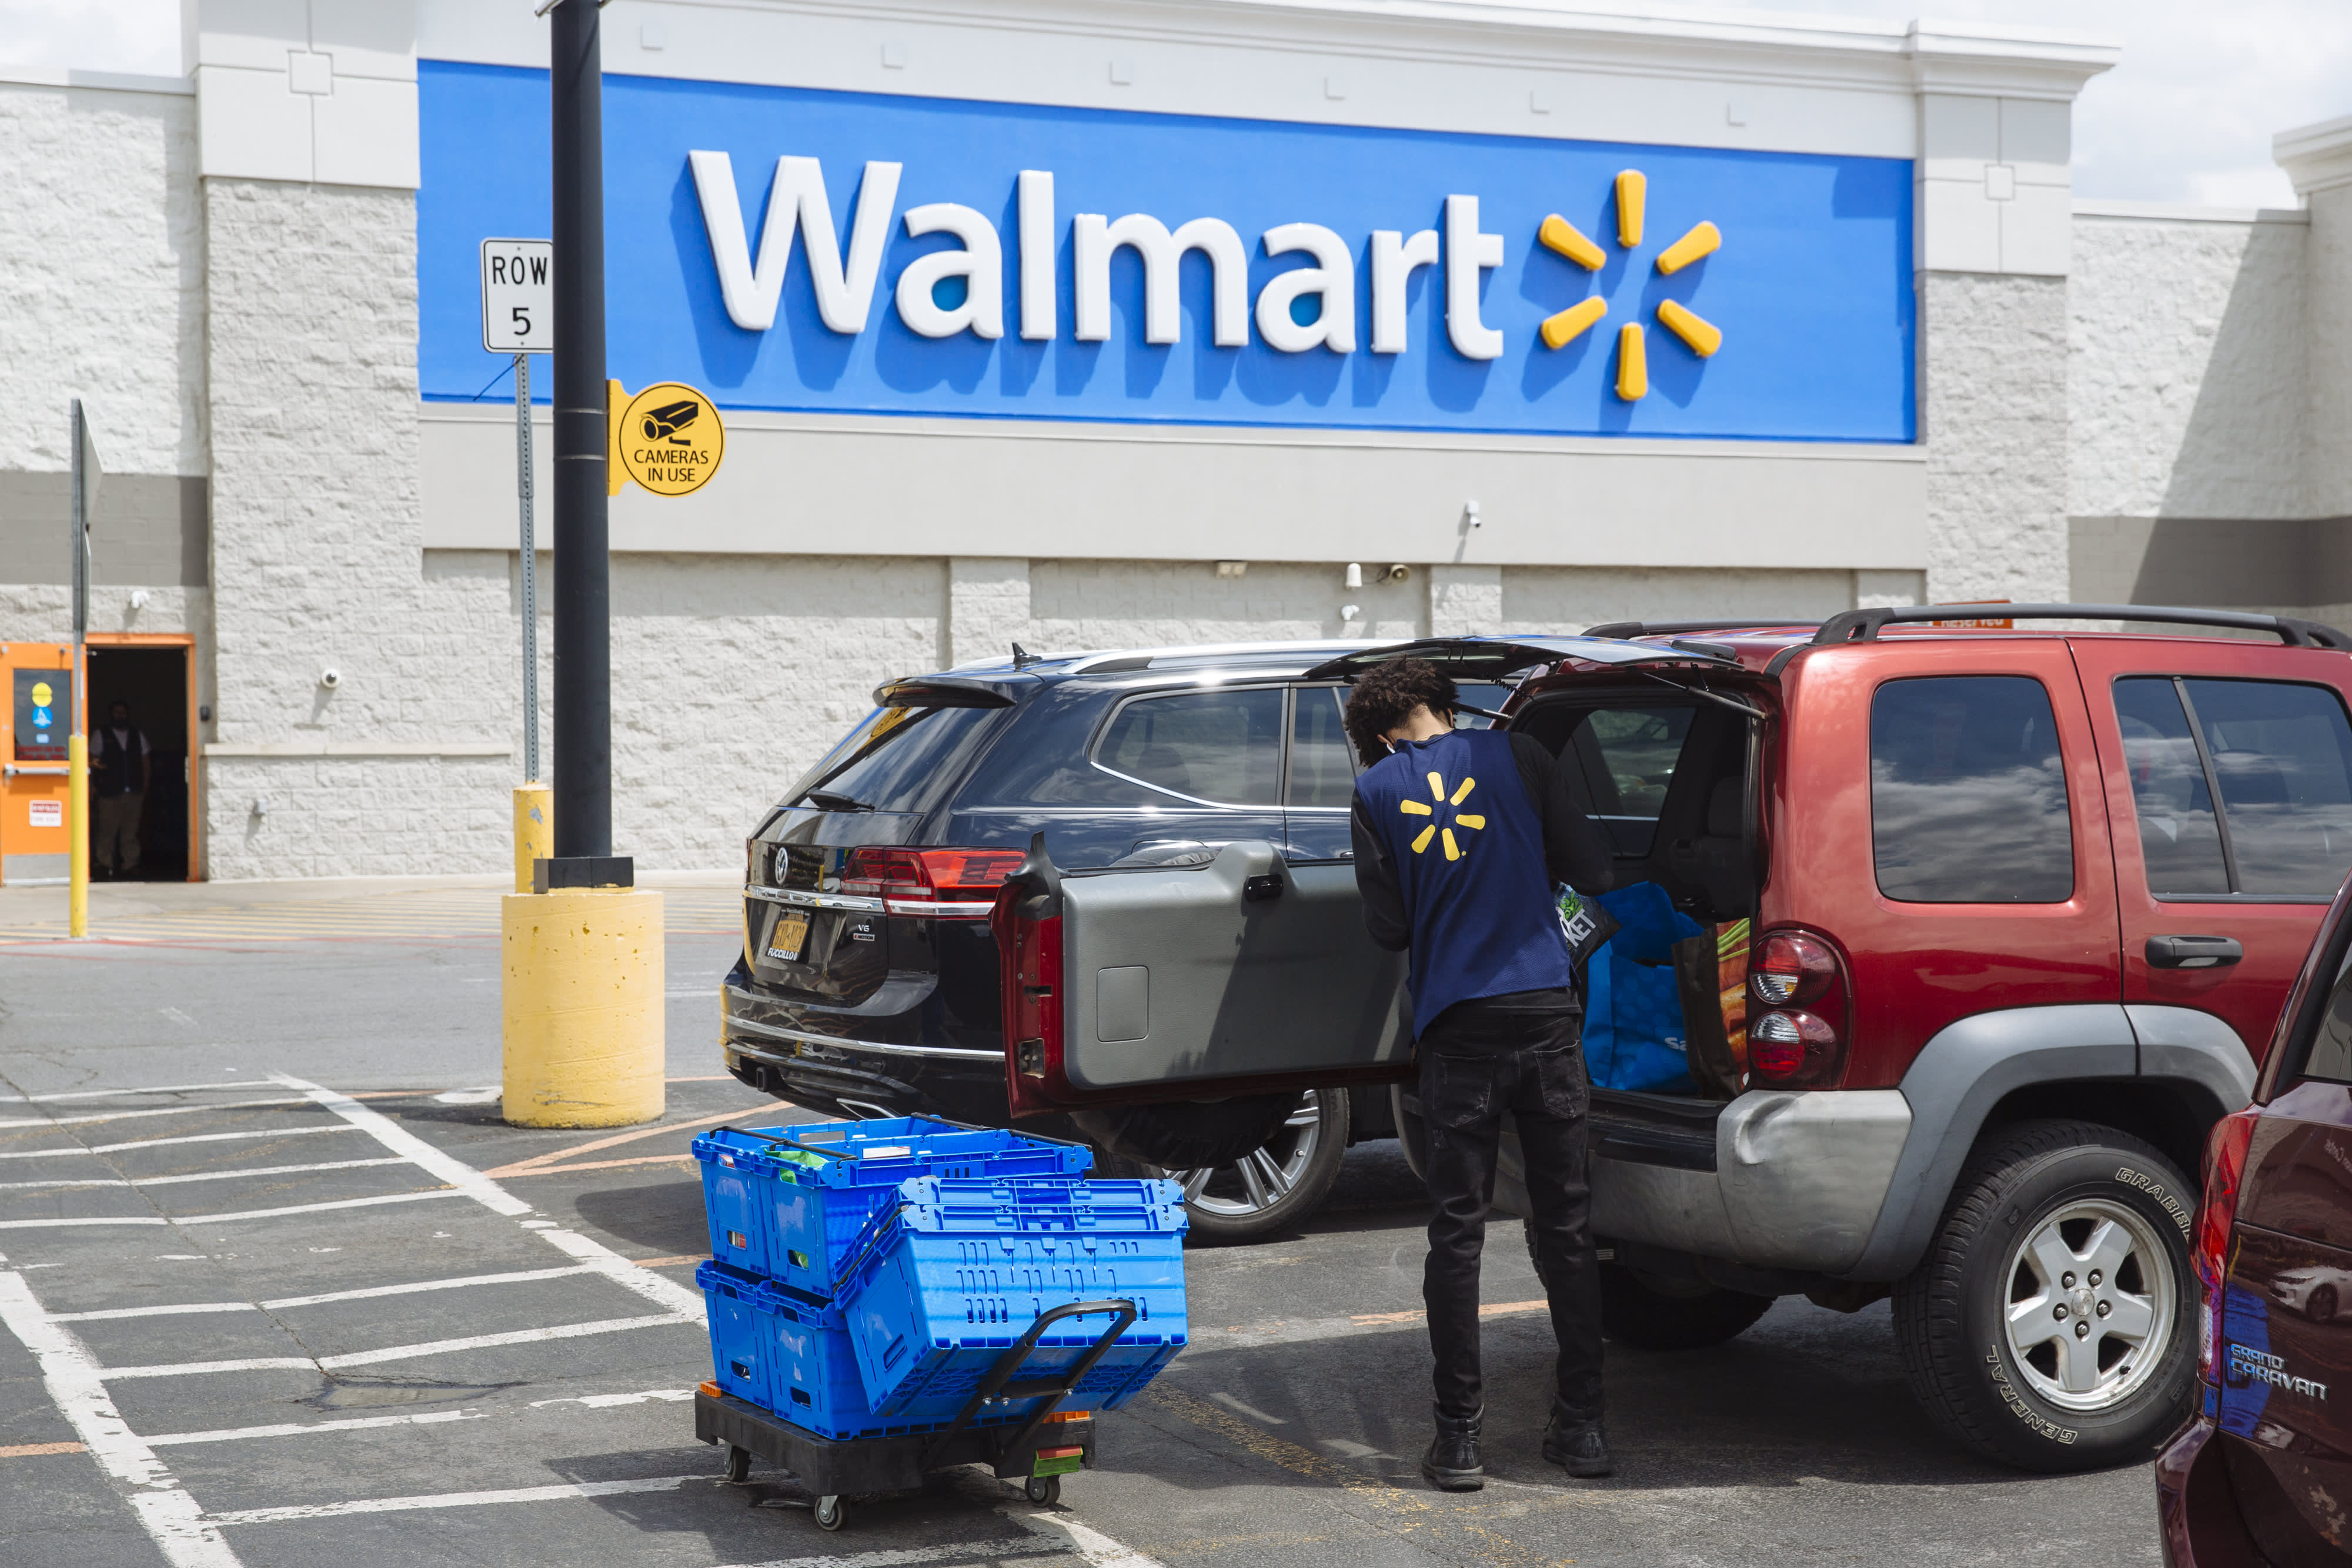 What Is Walmart Plus? [Your 2022 Mega Guide + 15 FAQs!]